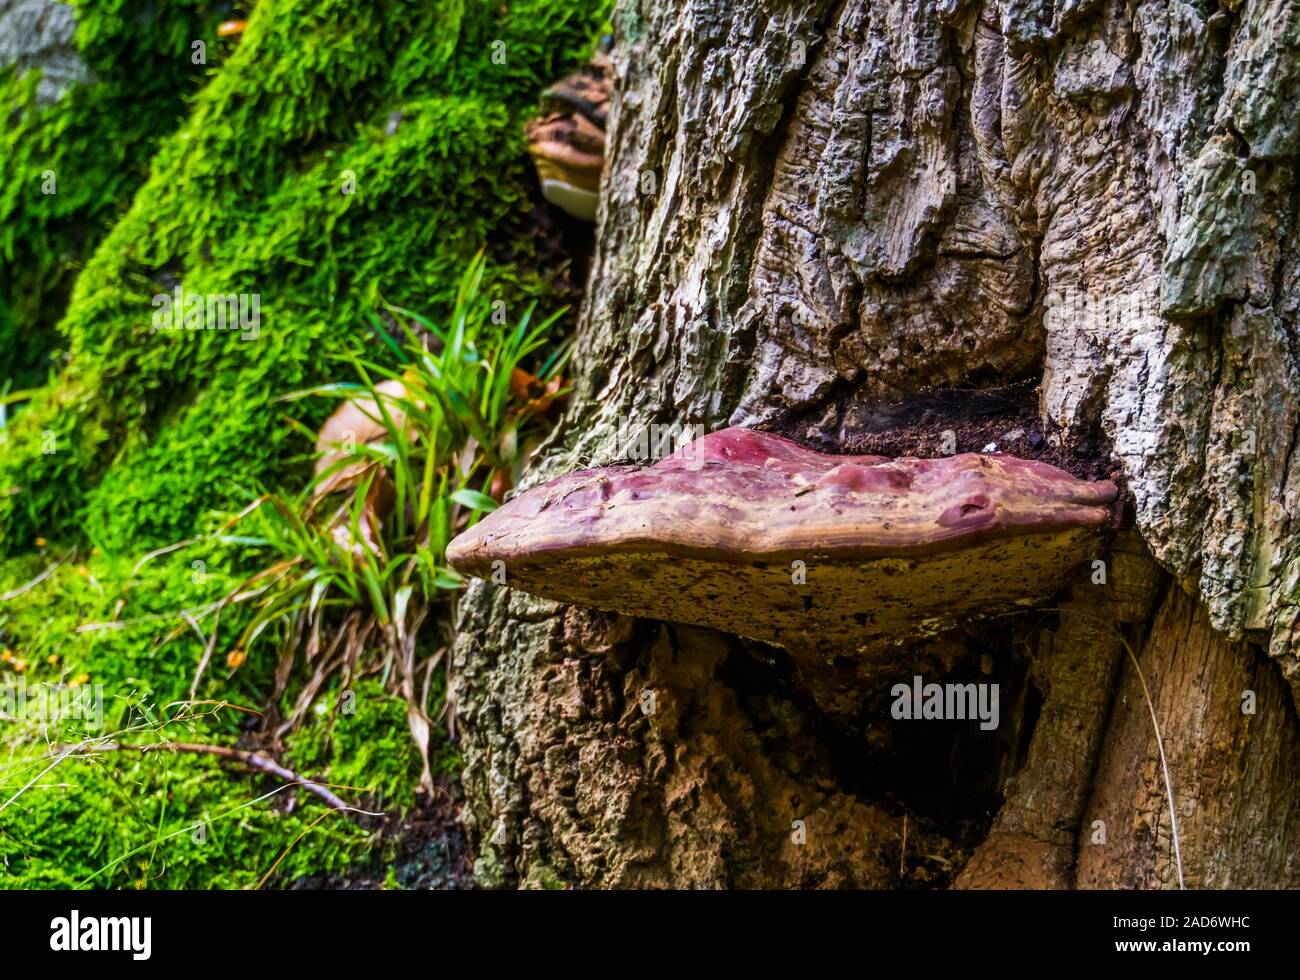 closeup of a beefsteak fungus growing on a tree, common and edible mushroom, Fungi specie from Europe and Britain Stock Photo